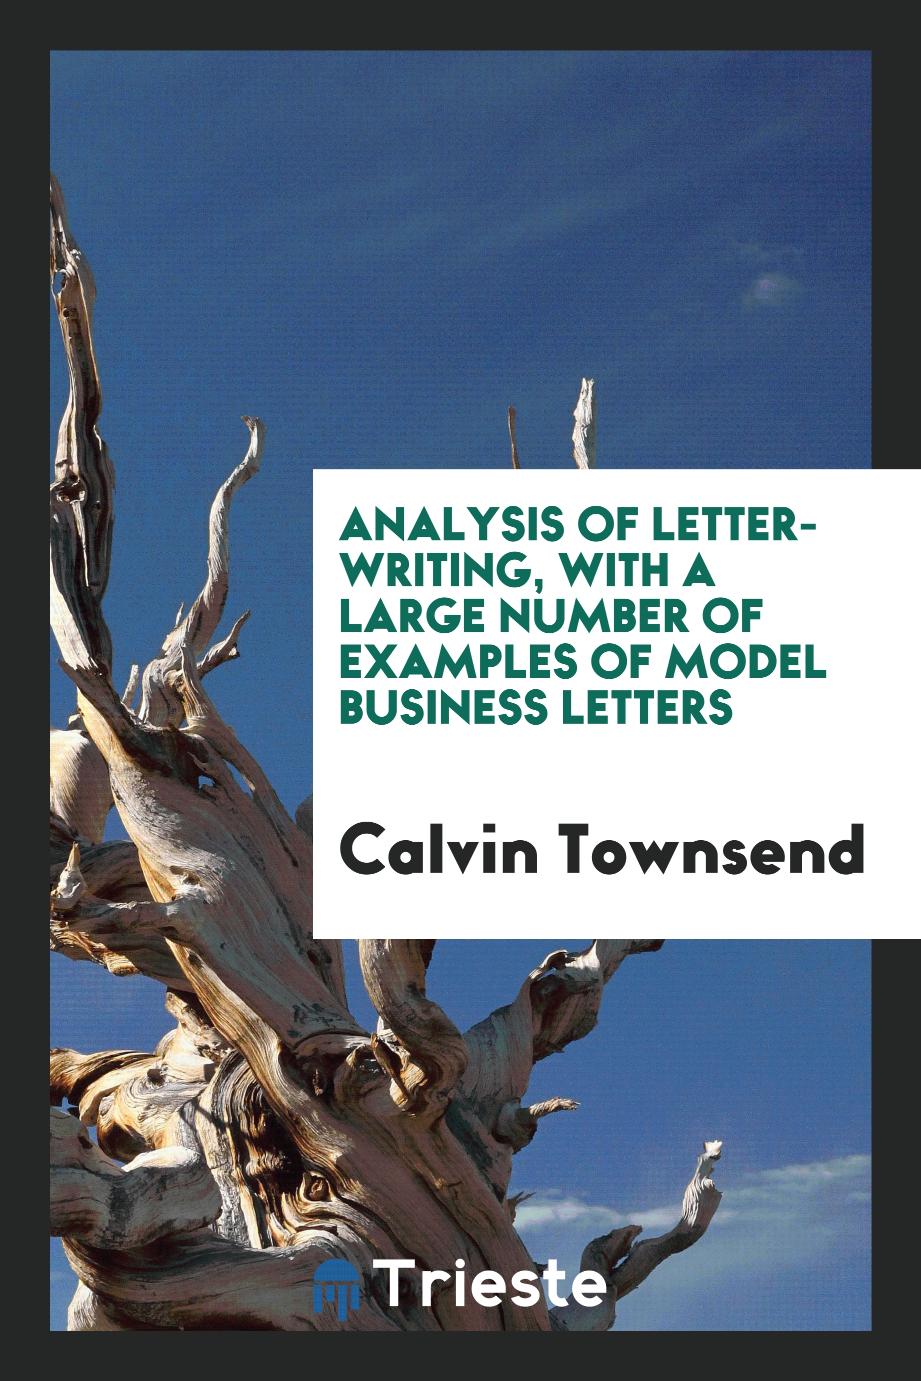 Analysis of Letter-writing, with a Large Number of Examples of Model Business Letters